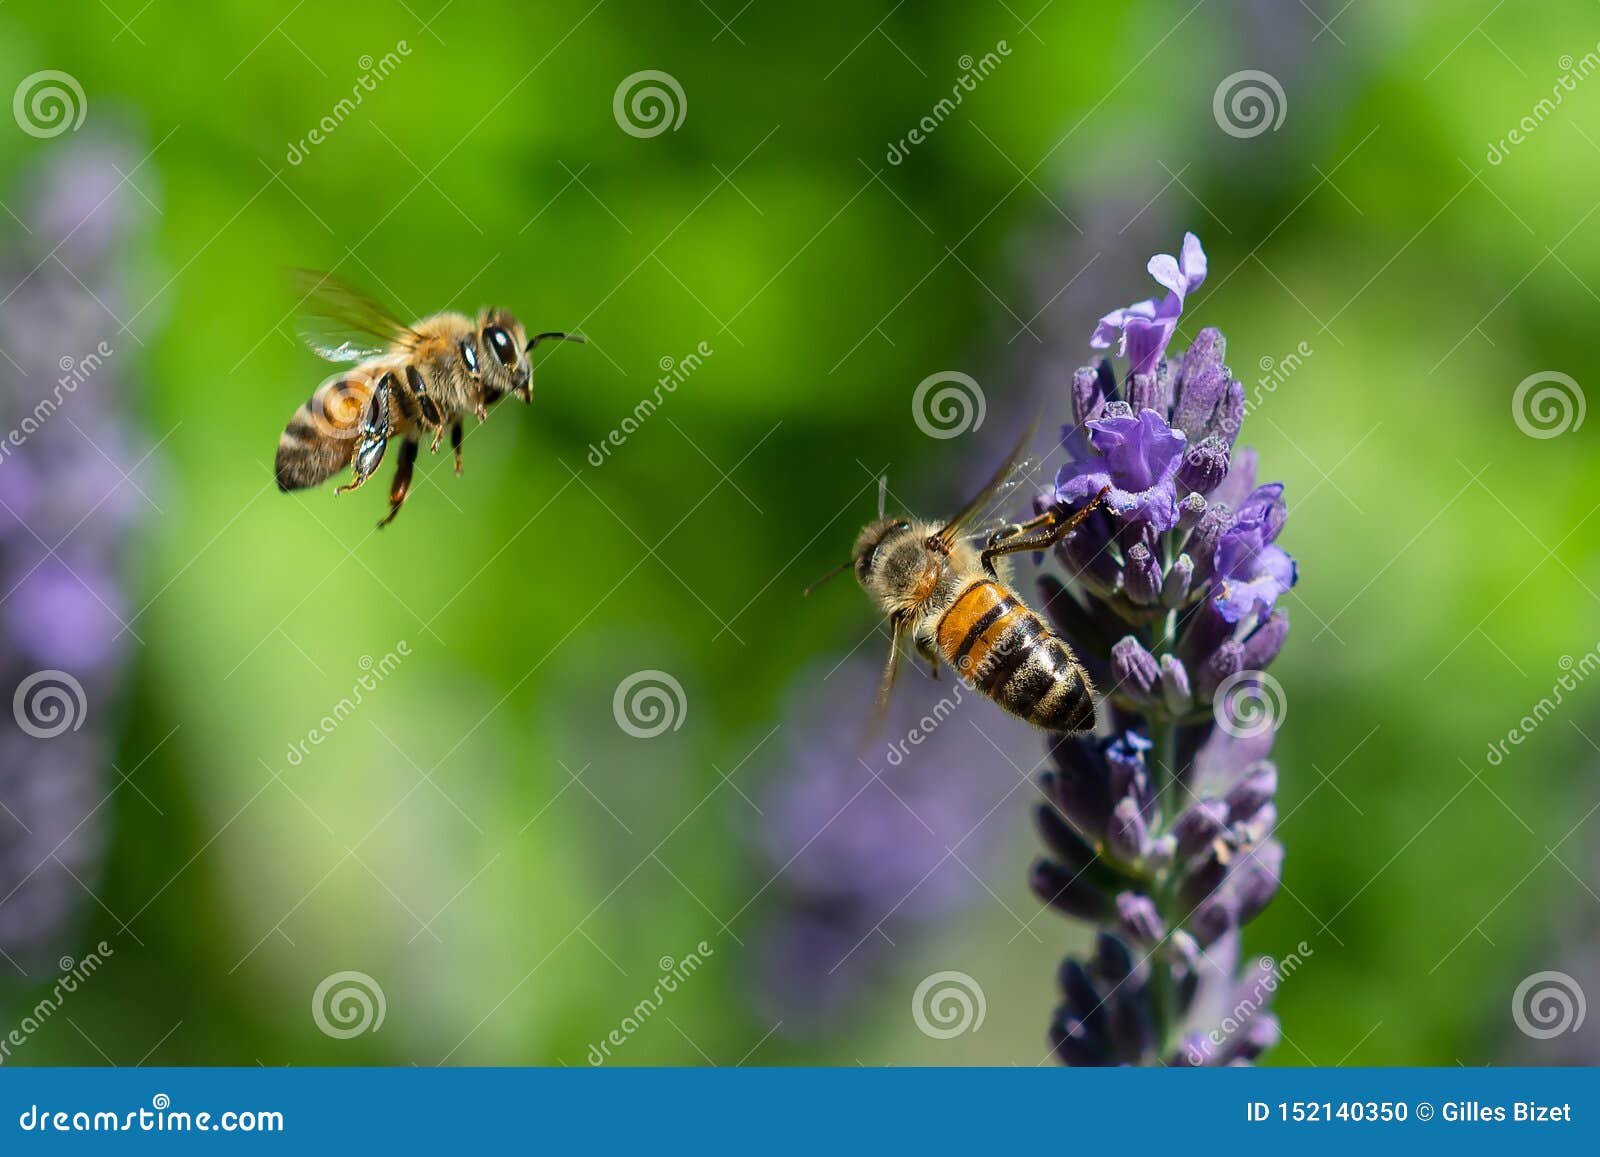 two bees in flight around lavender flowers